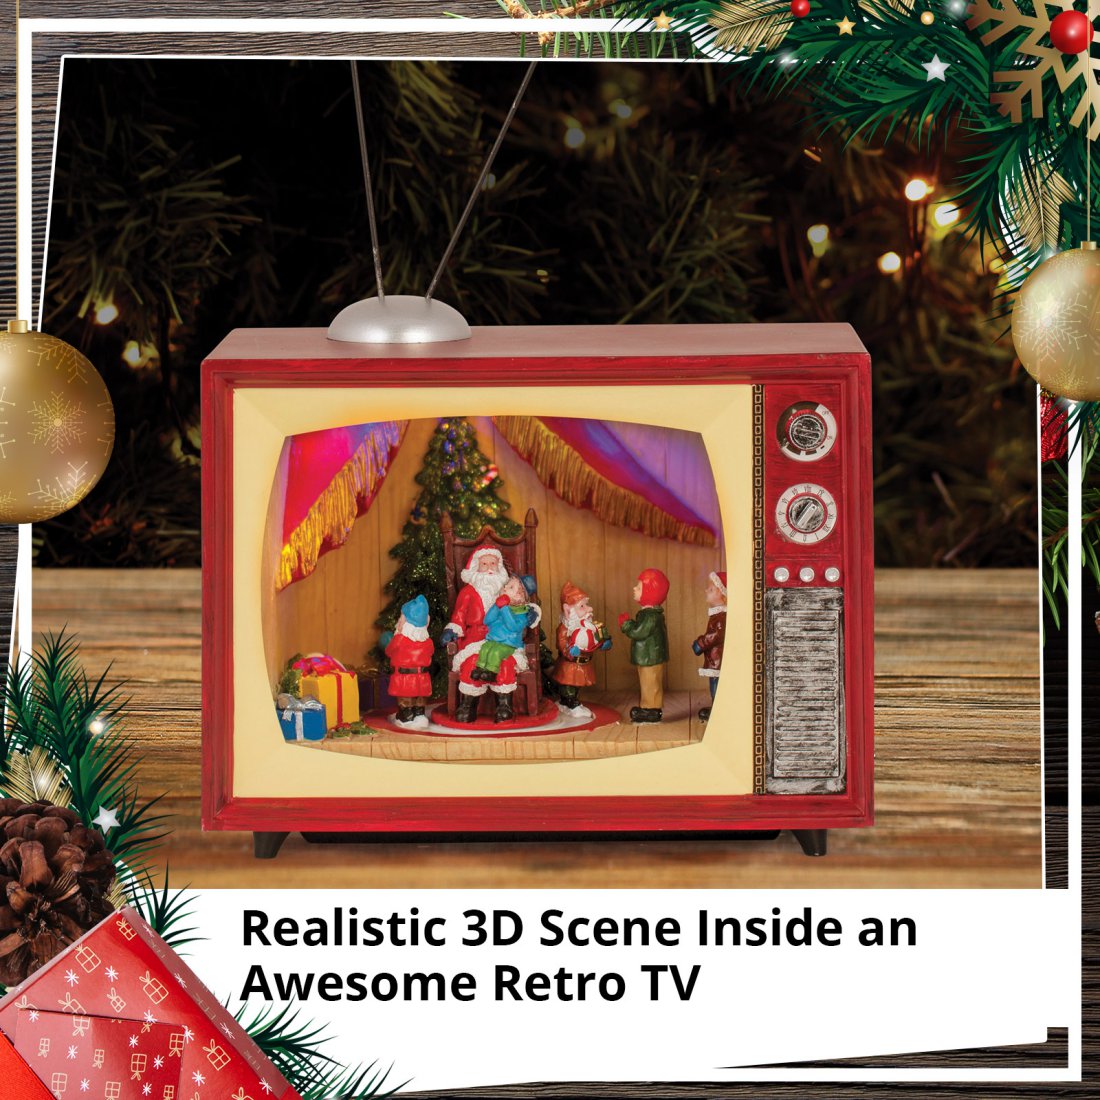 Animated Christmas LED Retro TV Television with Working Moving Scene 24cm Musical Lights